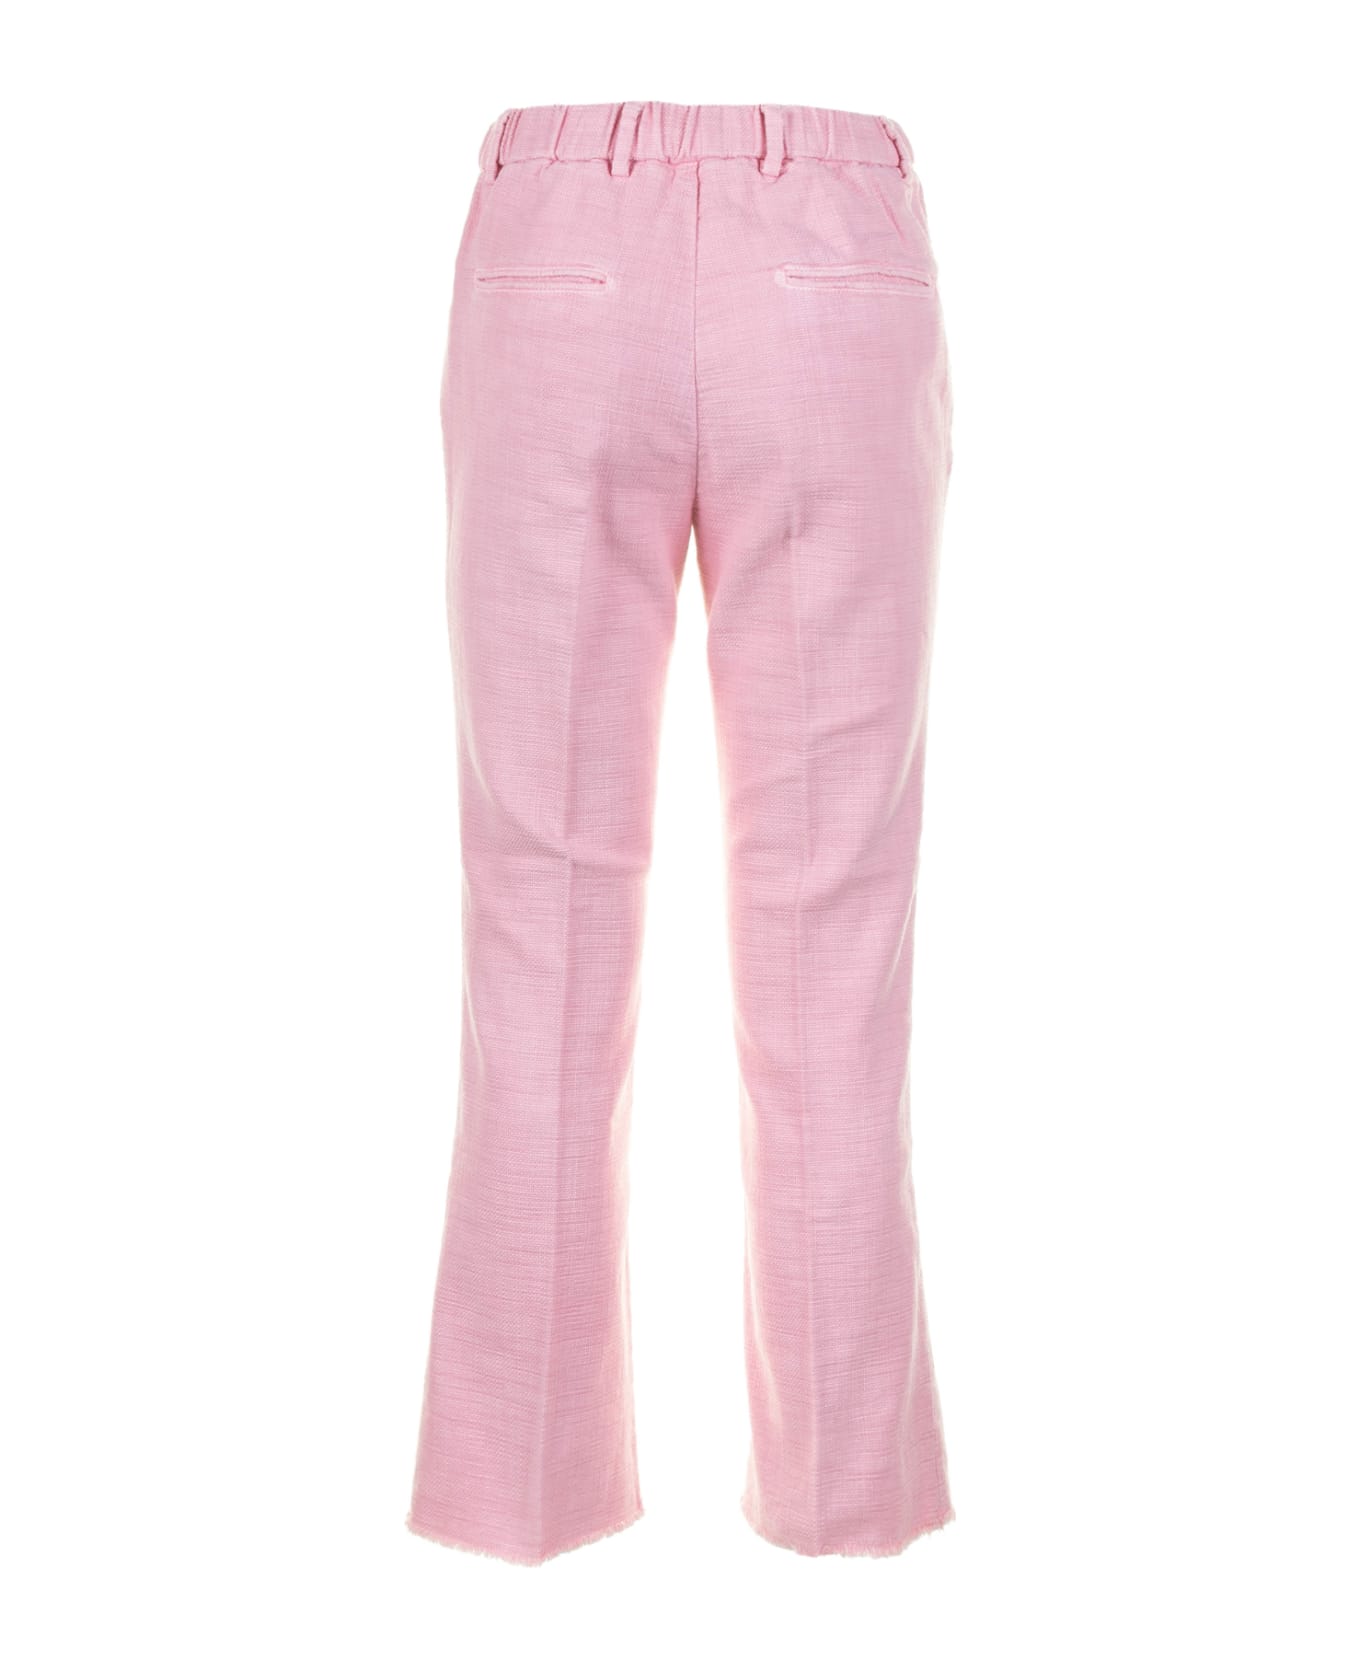 Myths Women's Pink Trousers - ROSA ボトムス